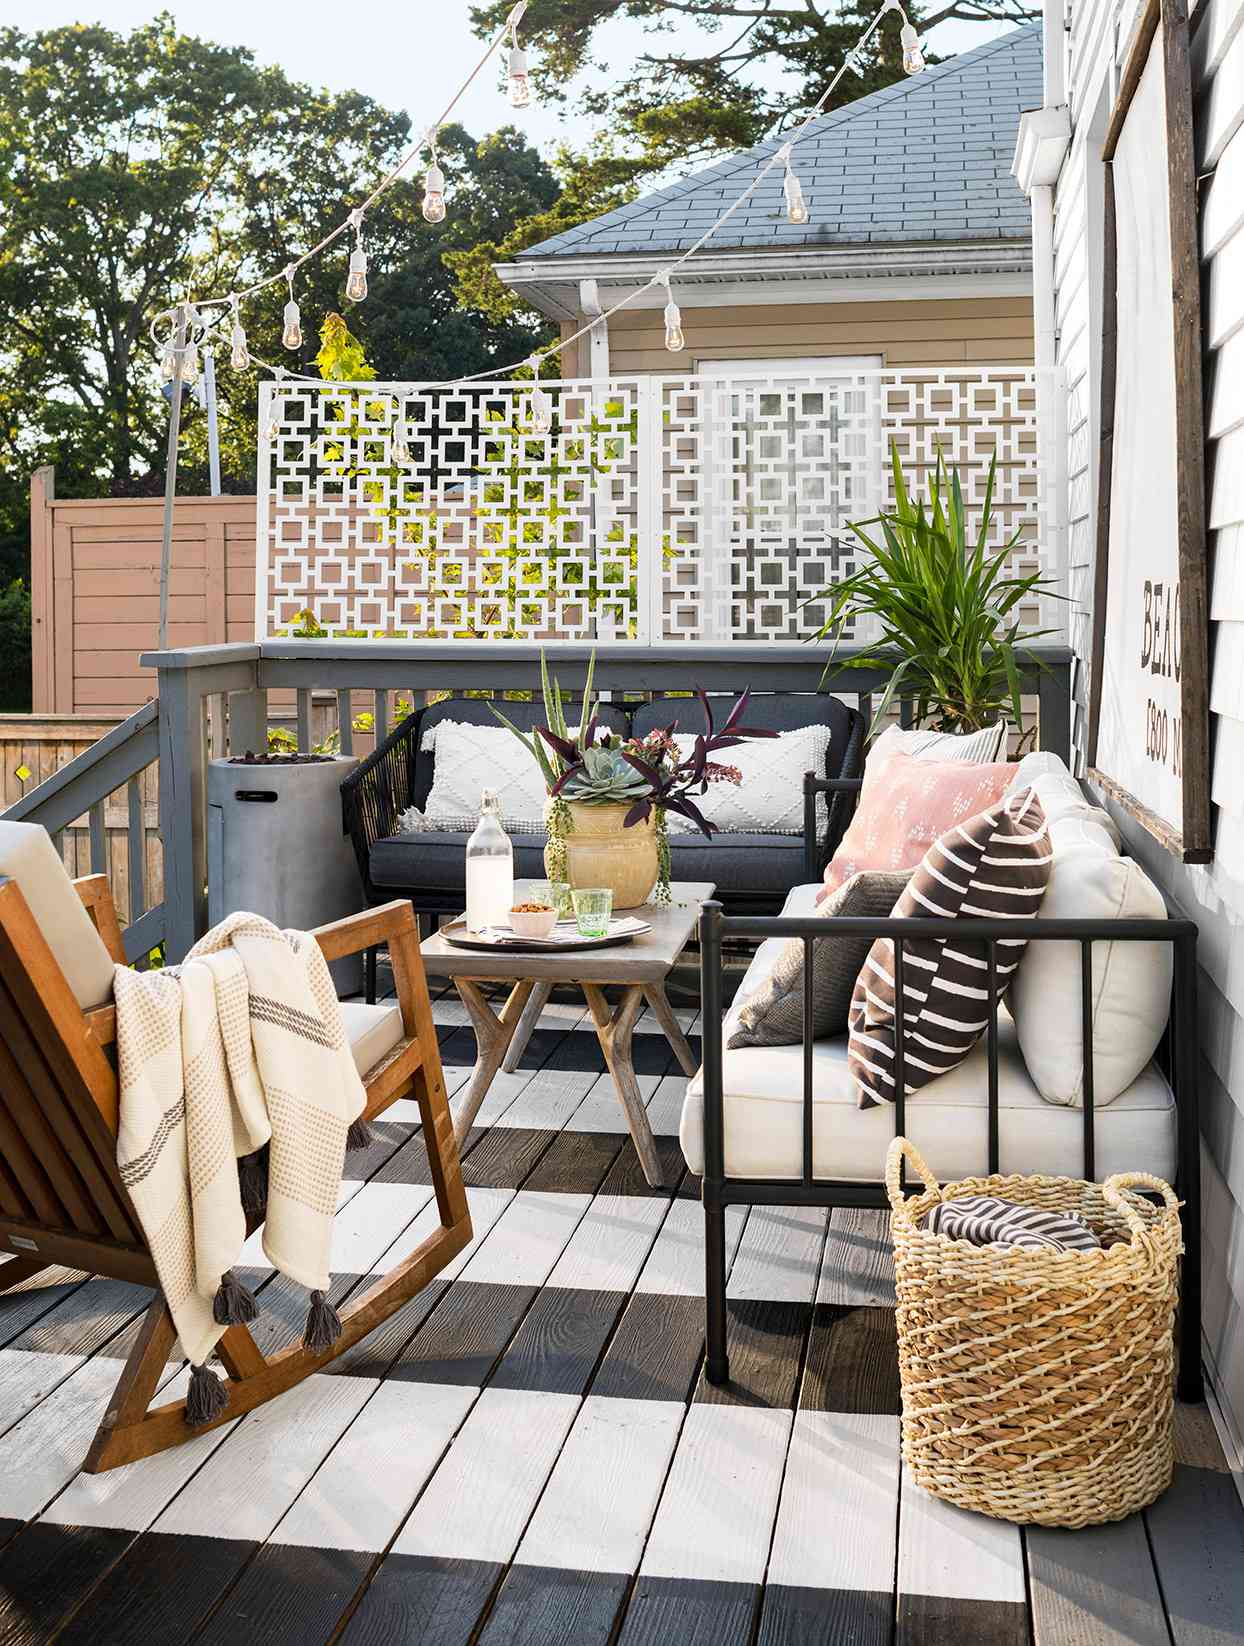 outdoor seating painted striped deck privacy screen basket lights